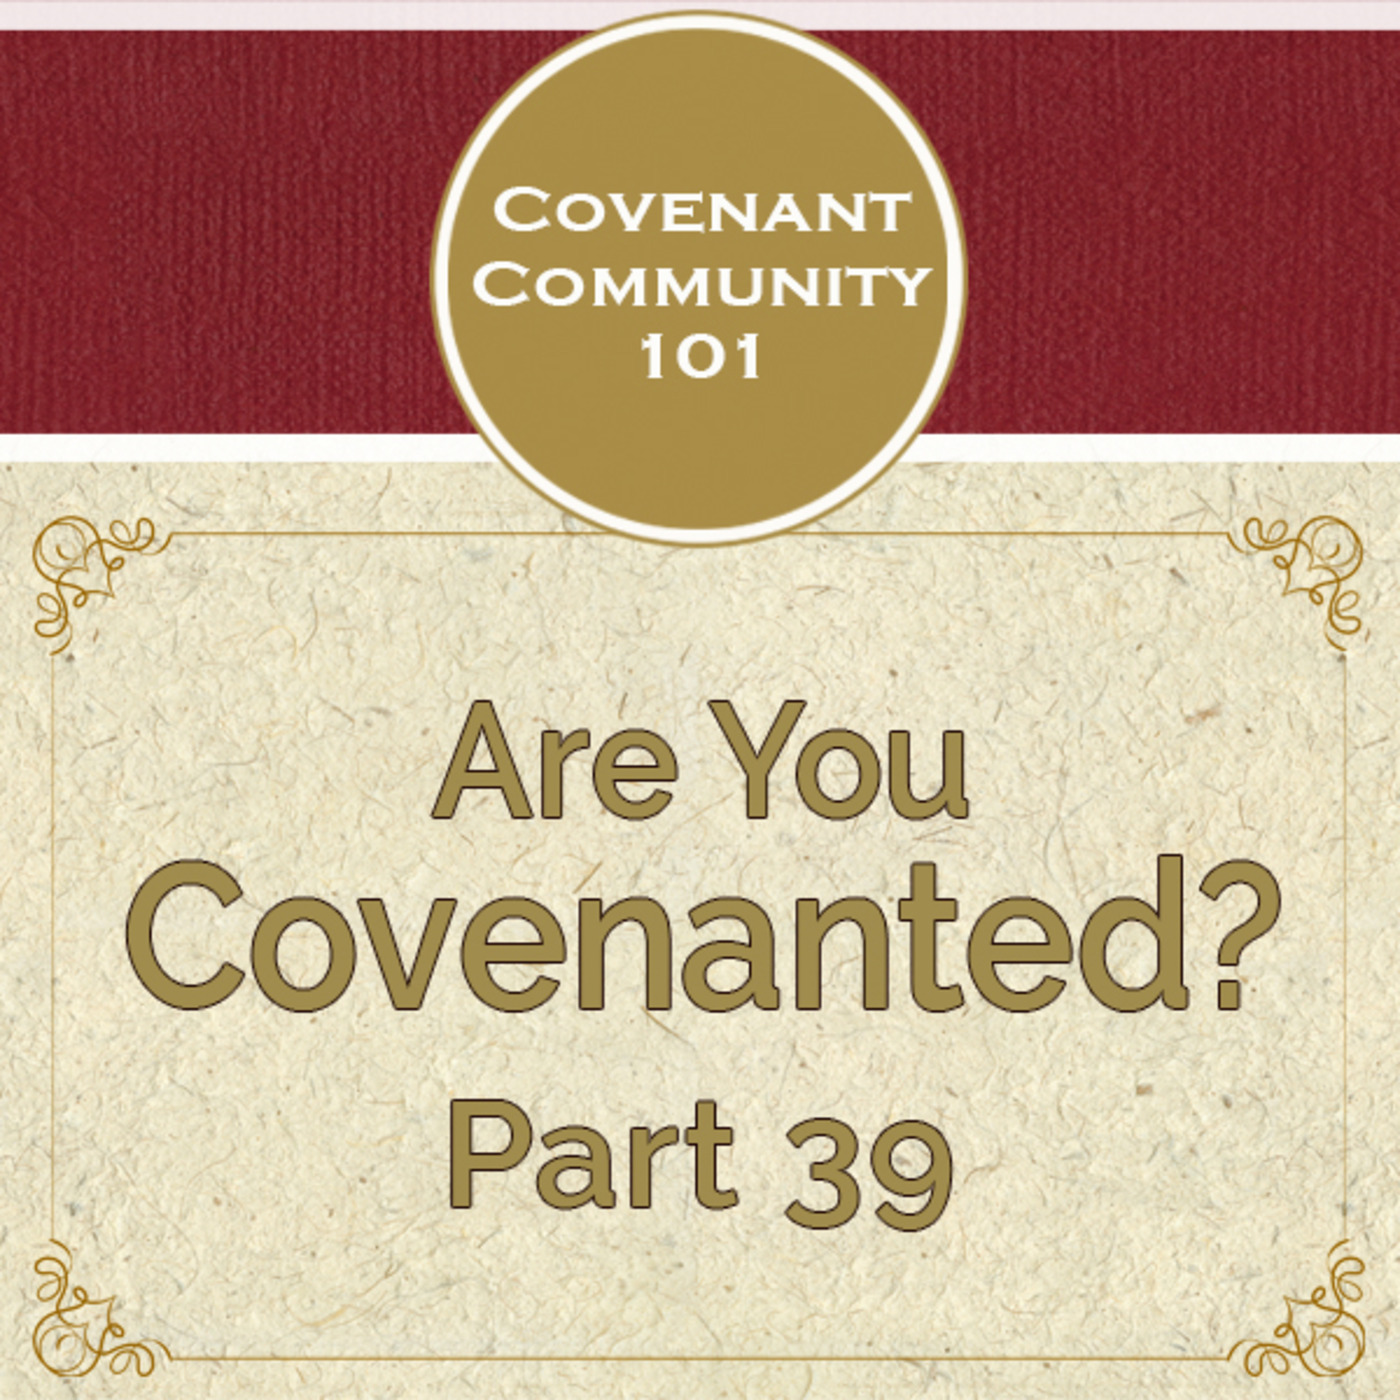 Covenant Community 101: Are You Covenanted? Part 39